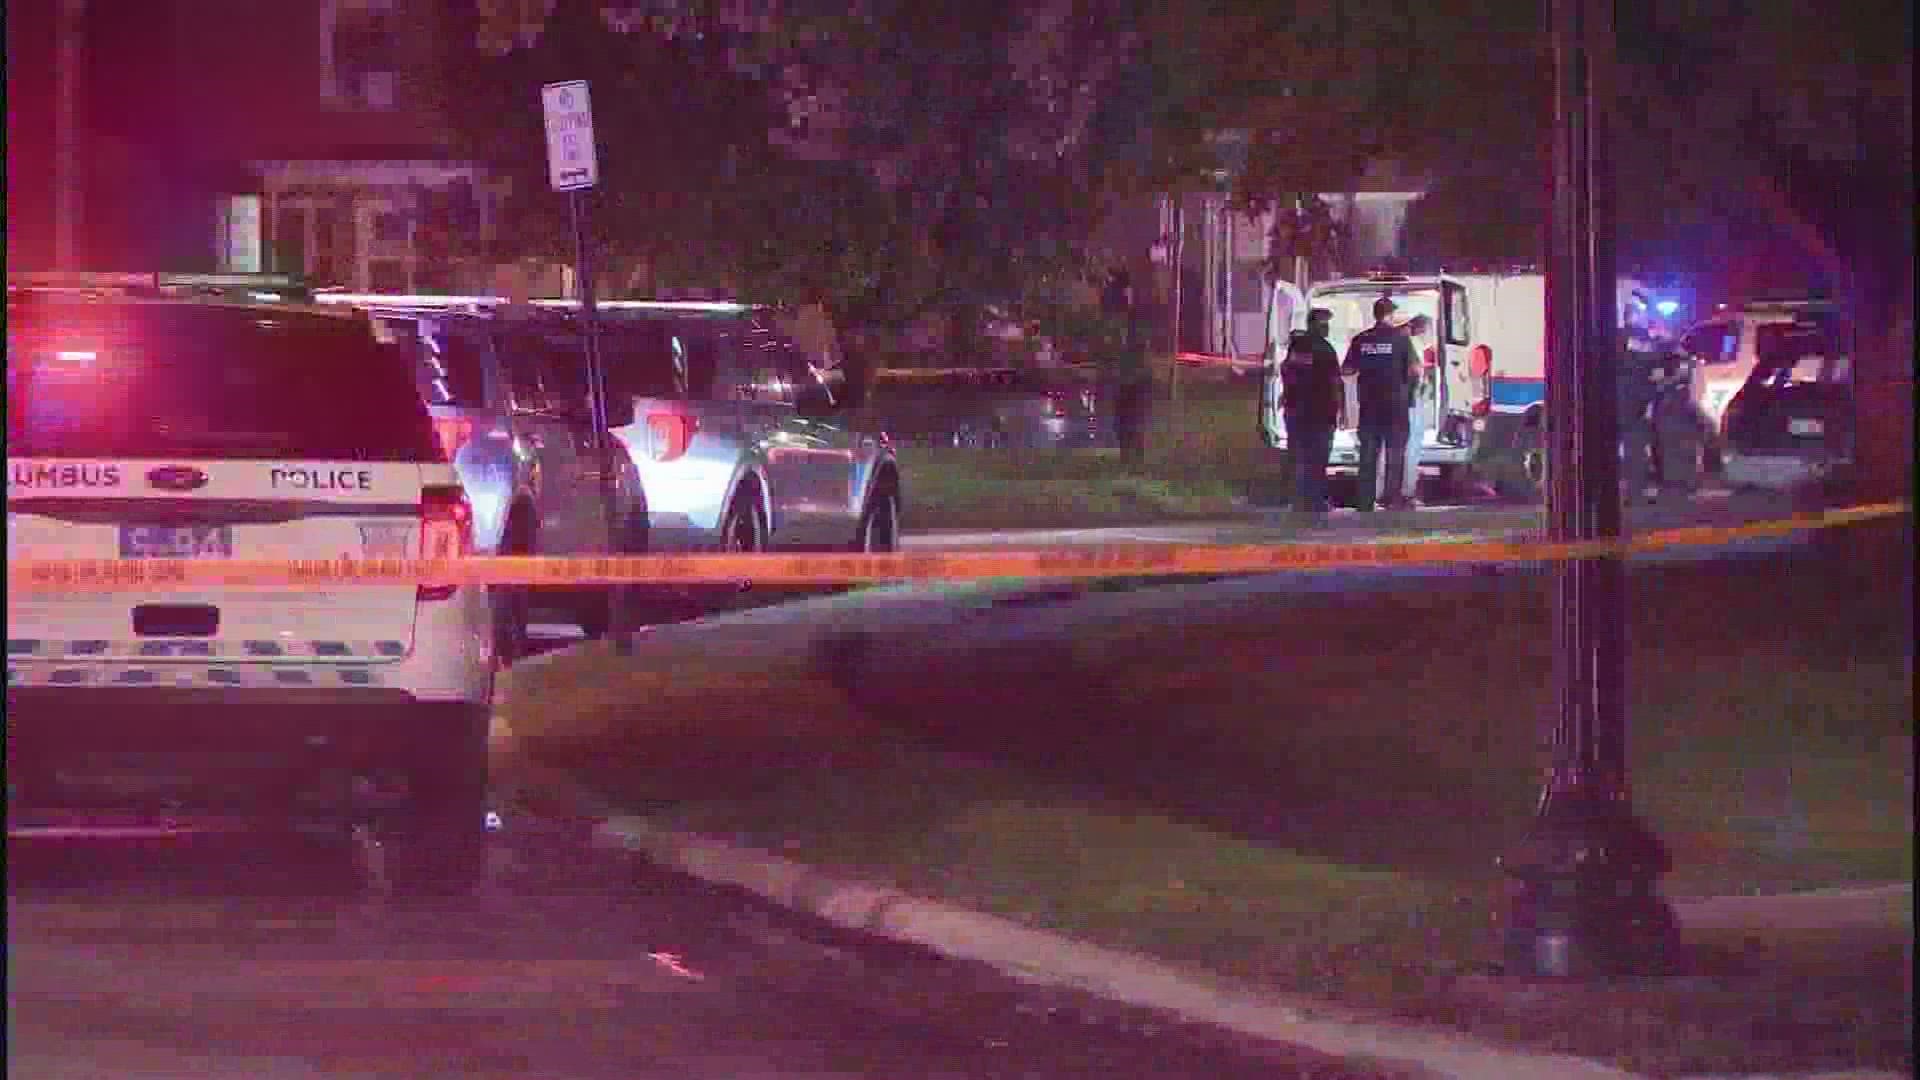 As of Sept. 22, there have been 101 homicides after two separate fatal shootings in north Columbus Wednesday night.